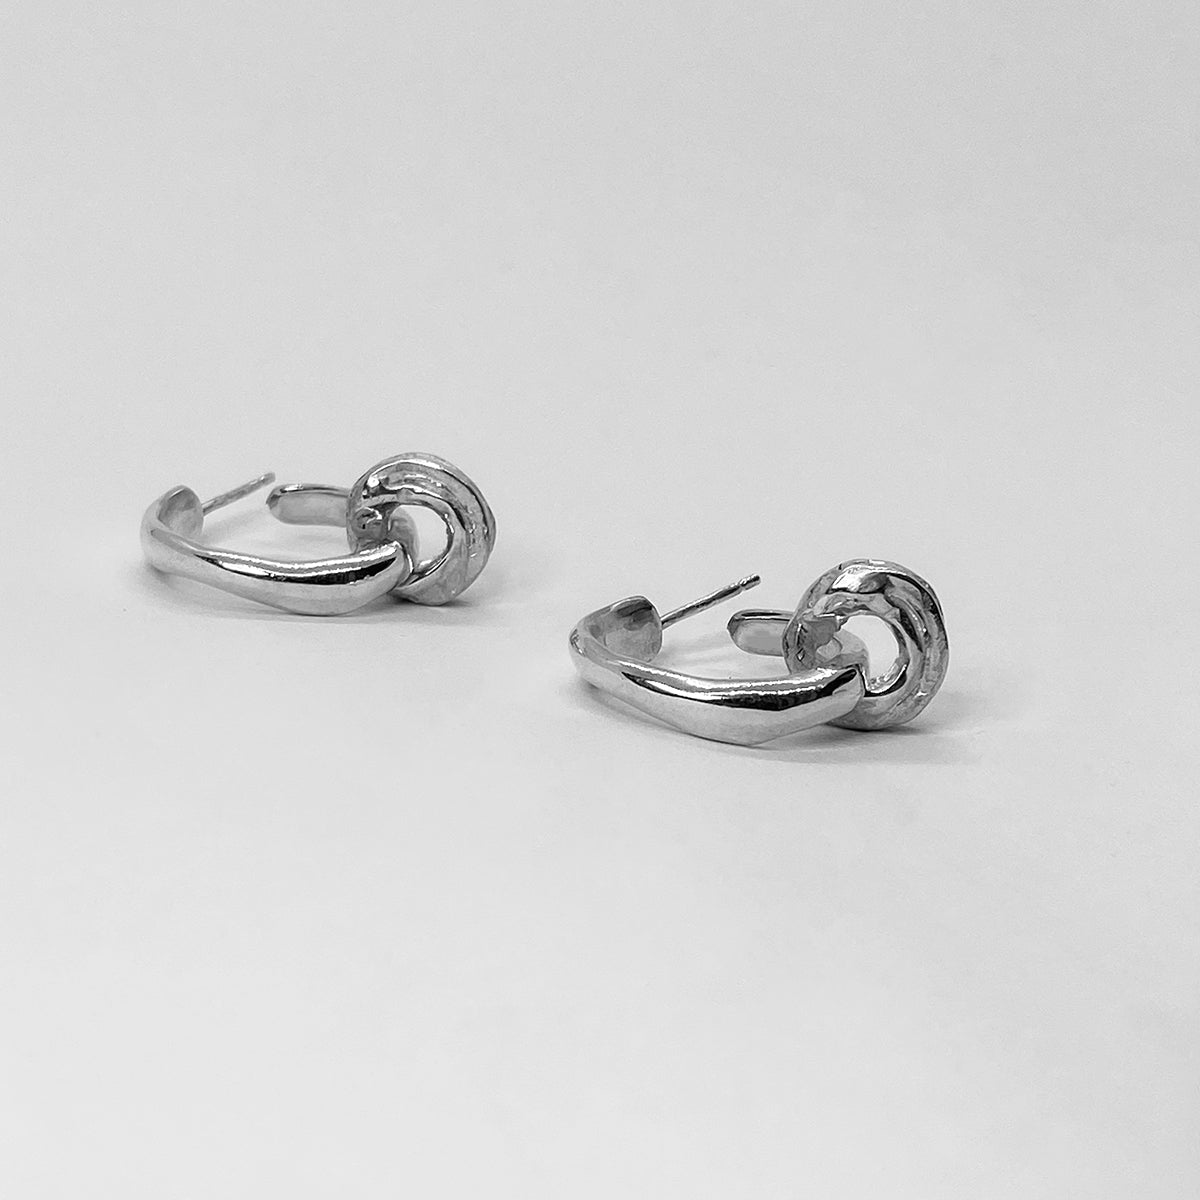 Wavy handmade hoops, one inside the other, made of sterling silver 925